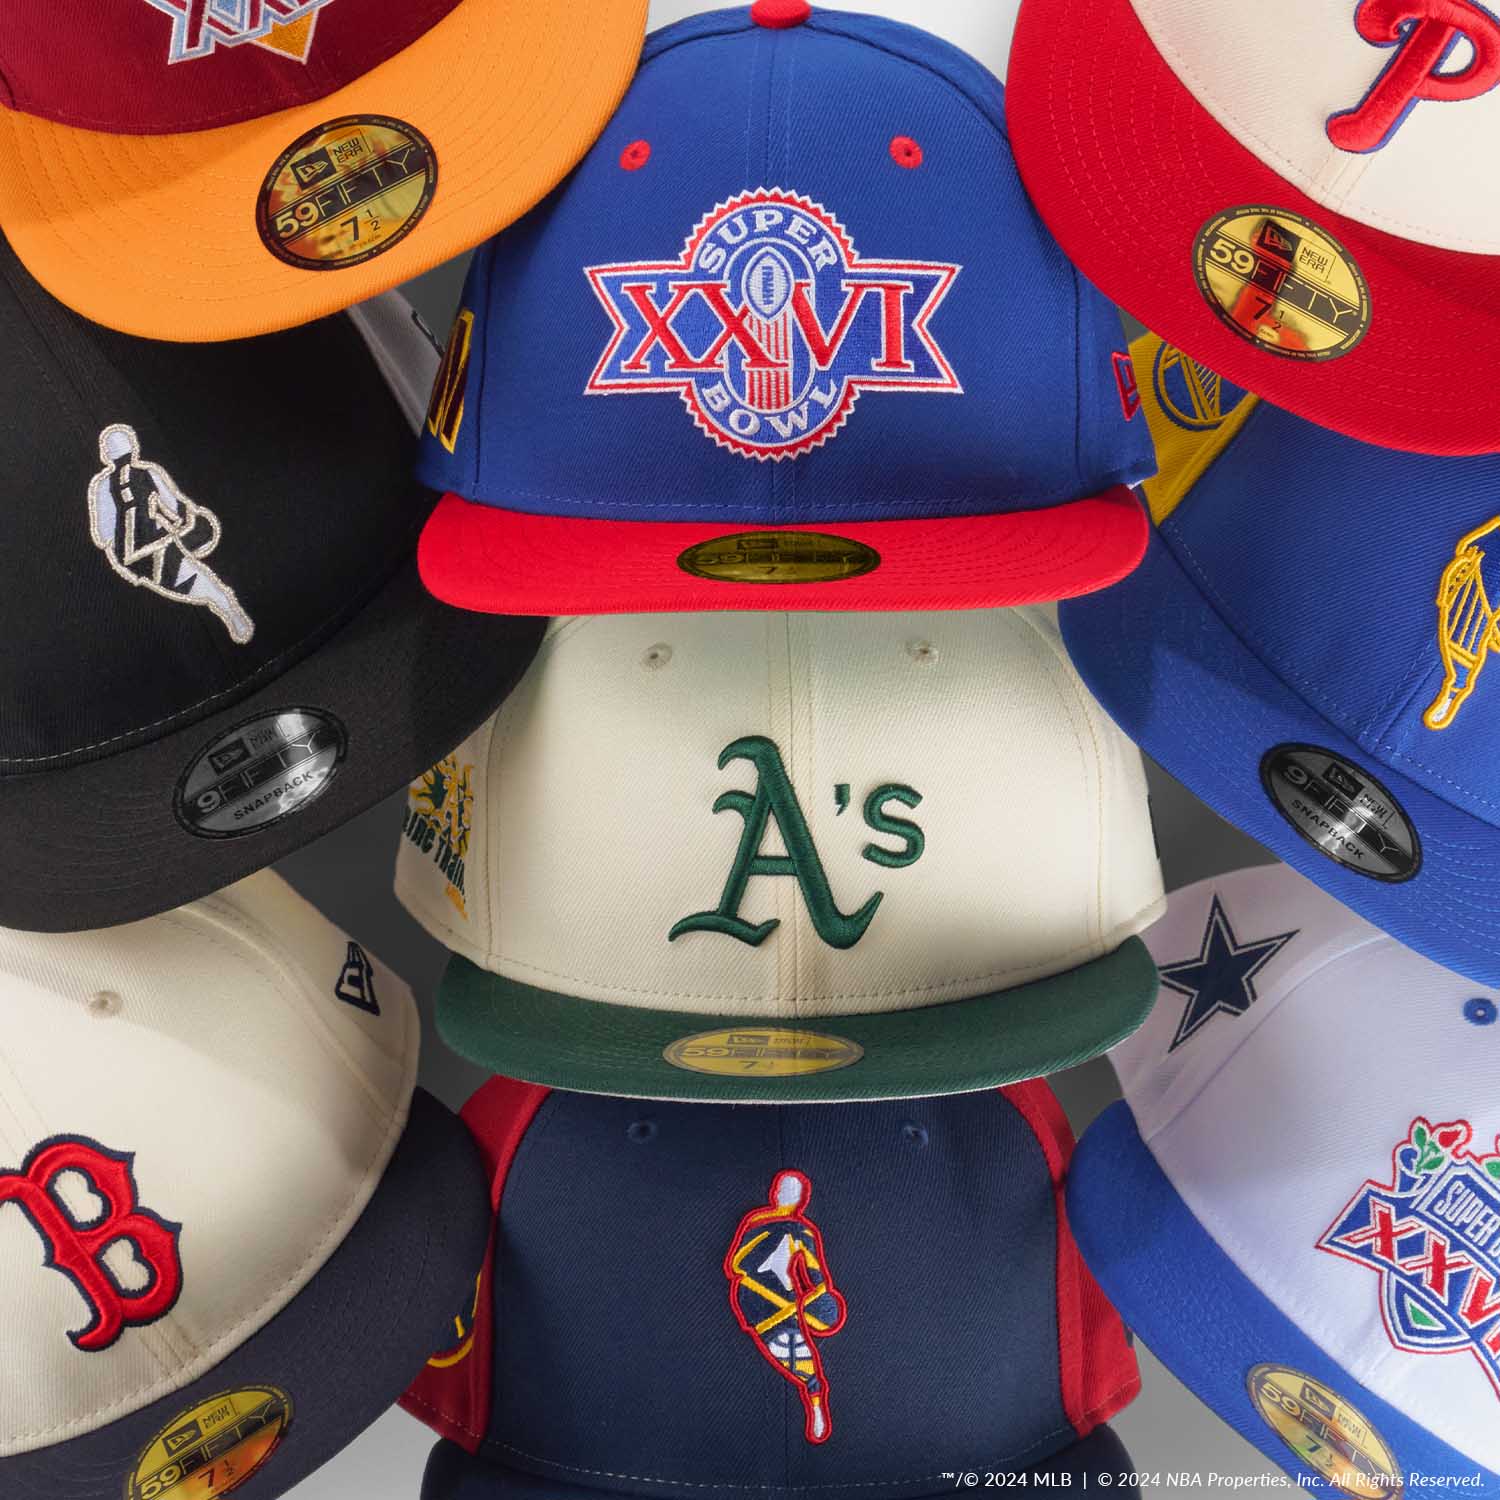 Shop the Classic Pack in select MLB, NFL, and NBA teams